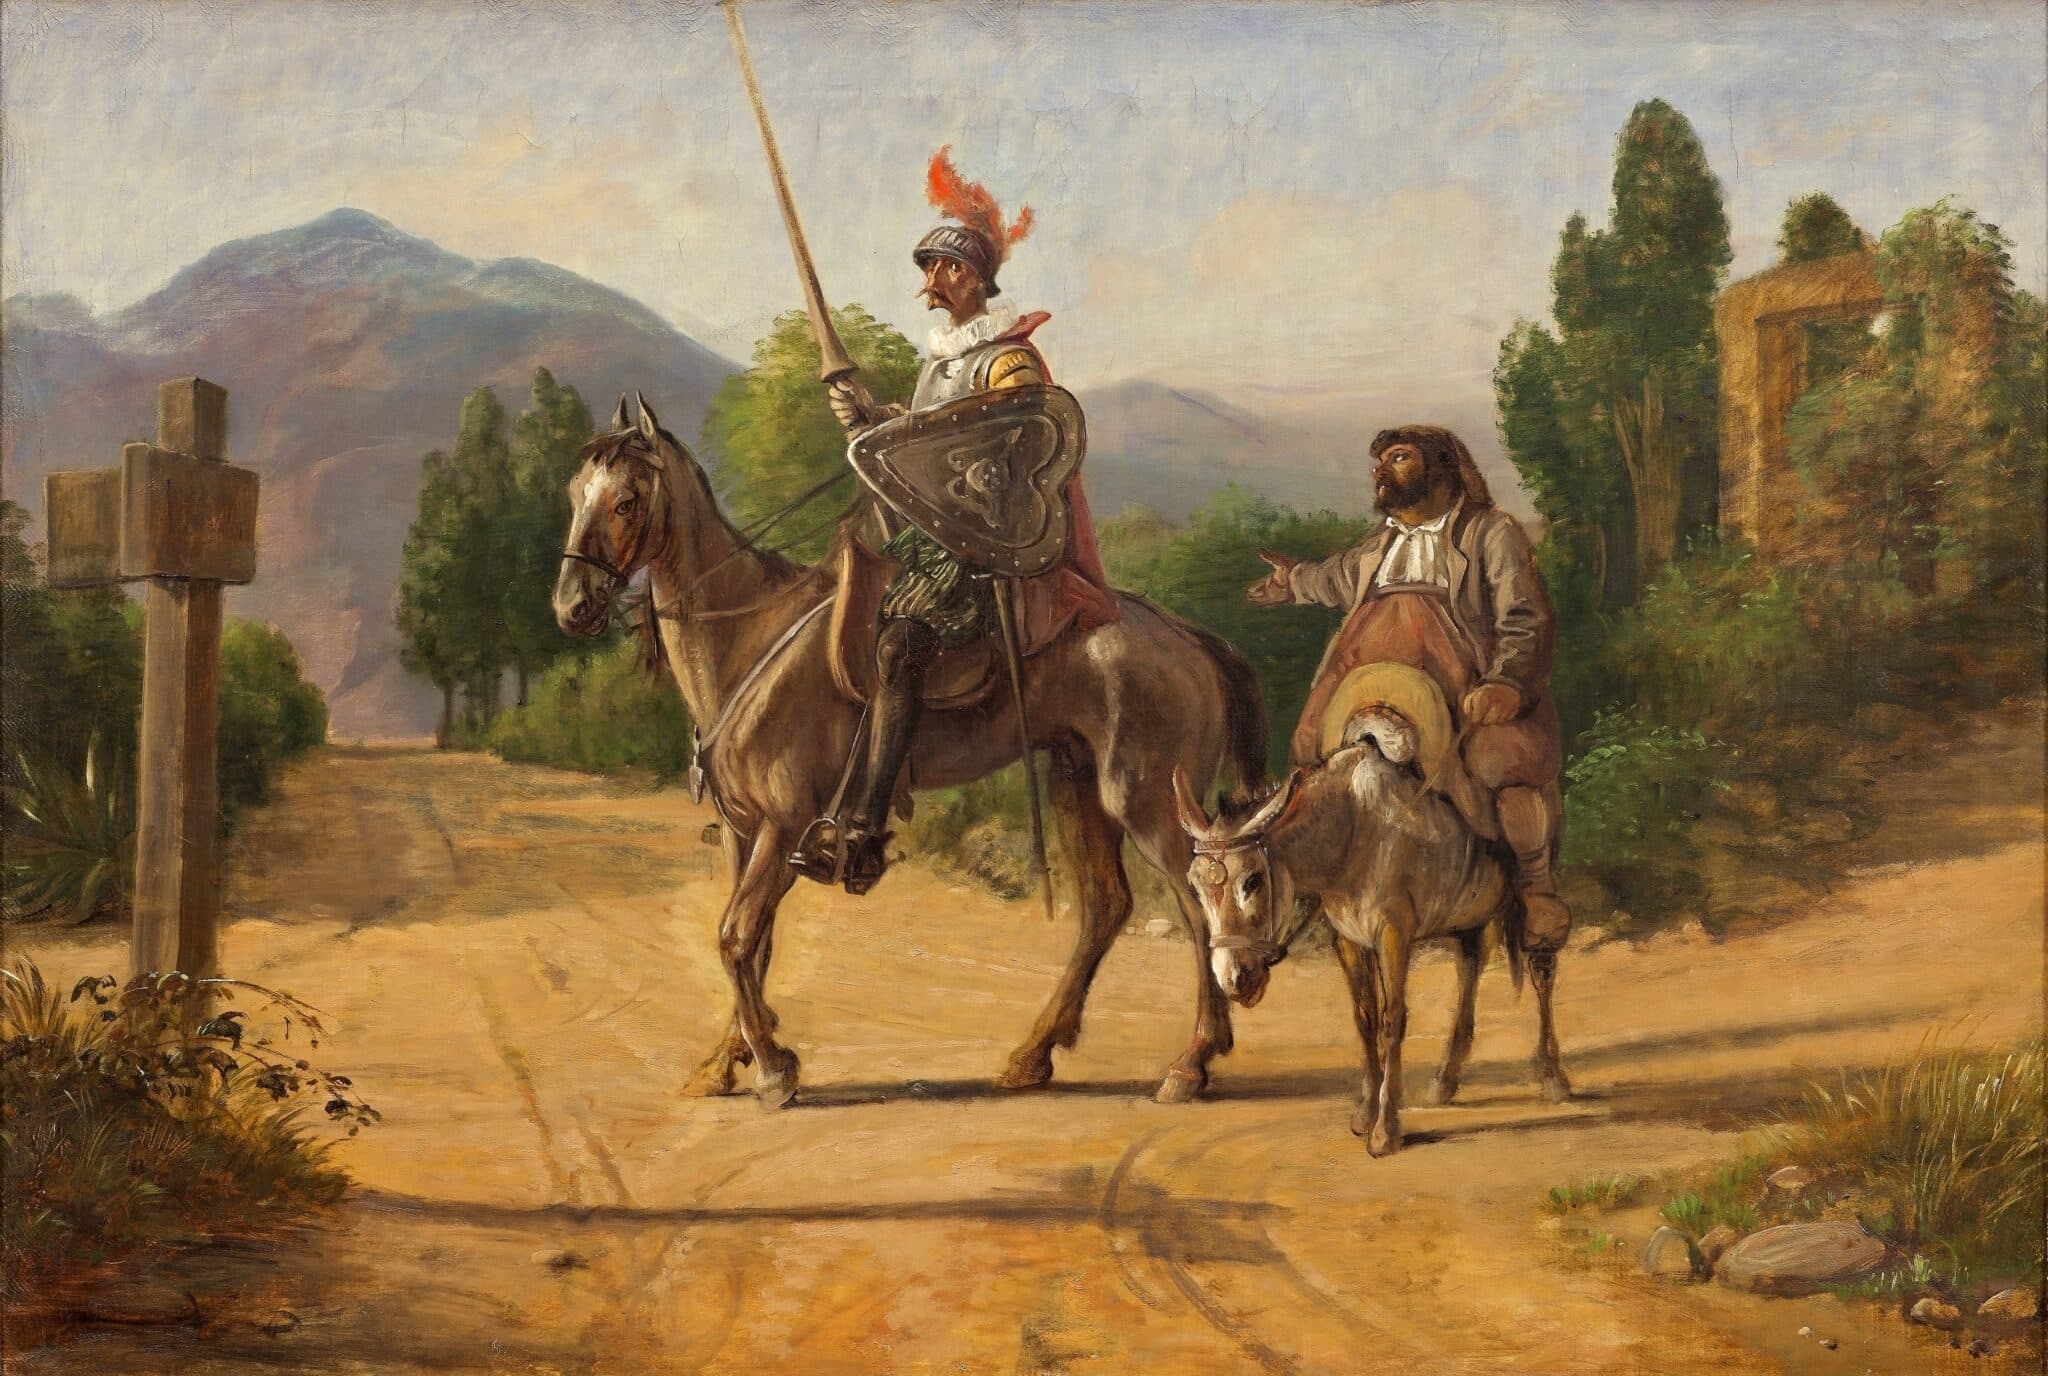 Painting of Don Quixote by William Marstrand